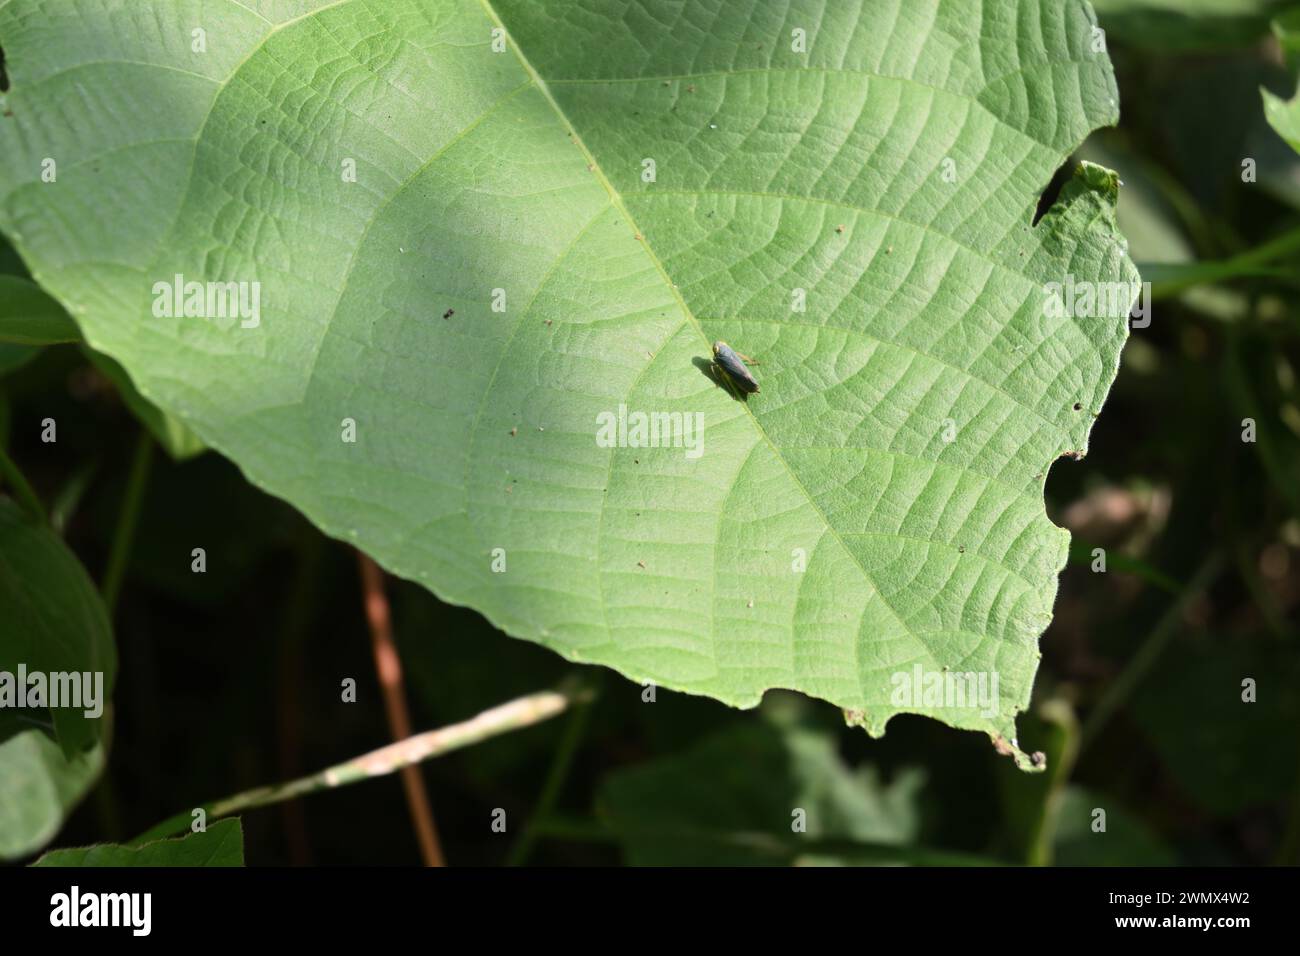 A tiny yellow eyed Leafhopper is perched on the surface of a large Kenda leaf (Macaranga peltata) in a wild area Stock Photo